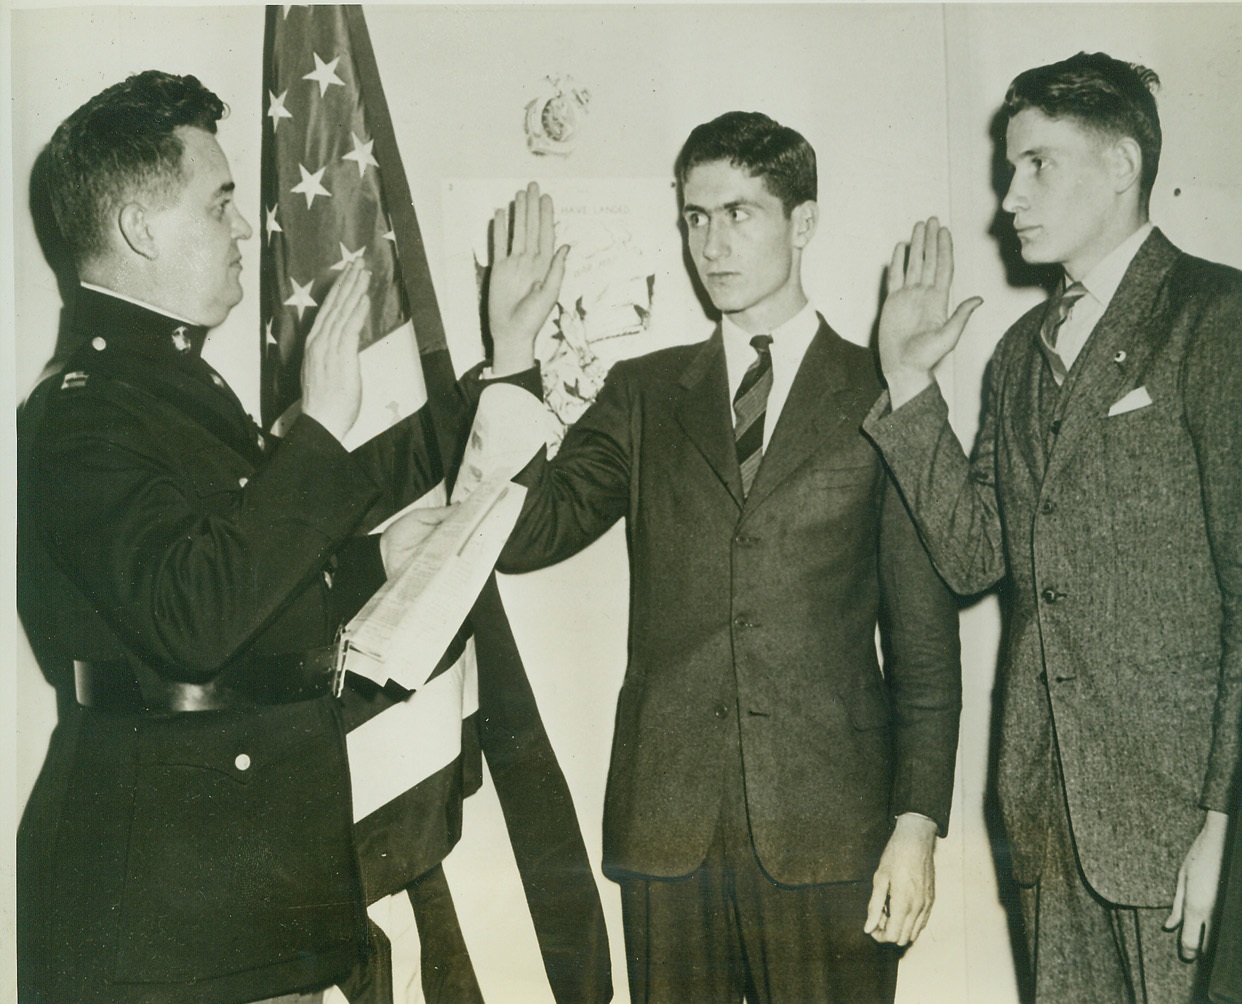 Hatfields and McCoys Patch Up Against Axis, 3/6/1942. CHARLESTON, W. VA. – That bloody mountain feud between the Hatfields and McCoys officially is over for the duration. Pictured proof here shows Edward LaPort, right, whose mother was a McCoy, and Cabell Terry Hatfield, center, taking the oath from Capt. Robert W. Gordon, Marine Corps recruiter at Charleston, W.Va., that they will blast the Axis and not each other. Credit: (ACME);